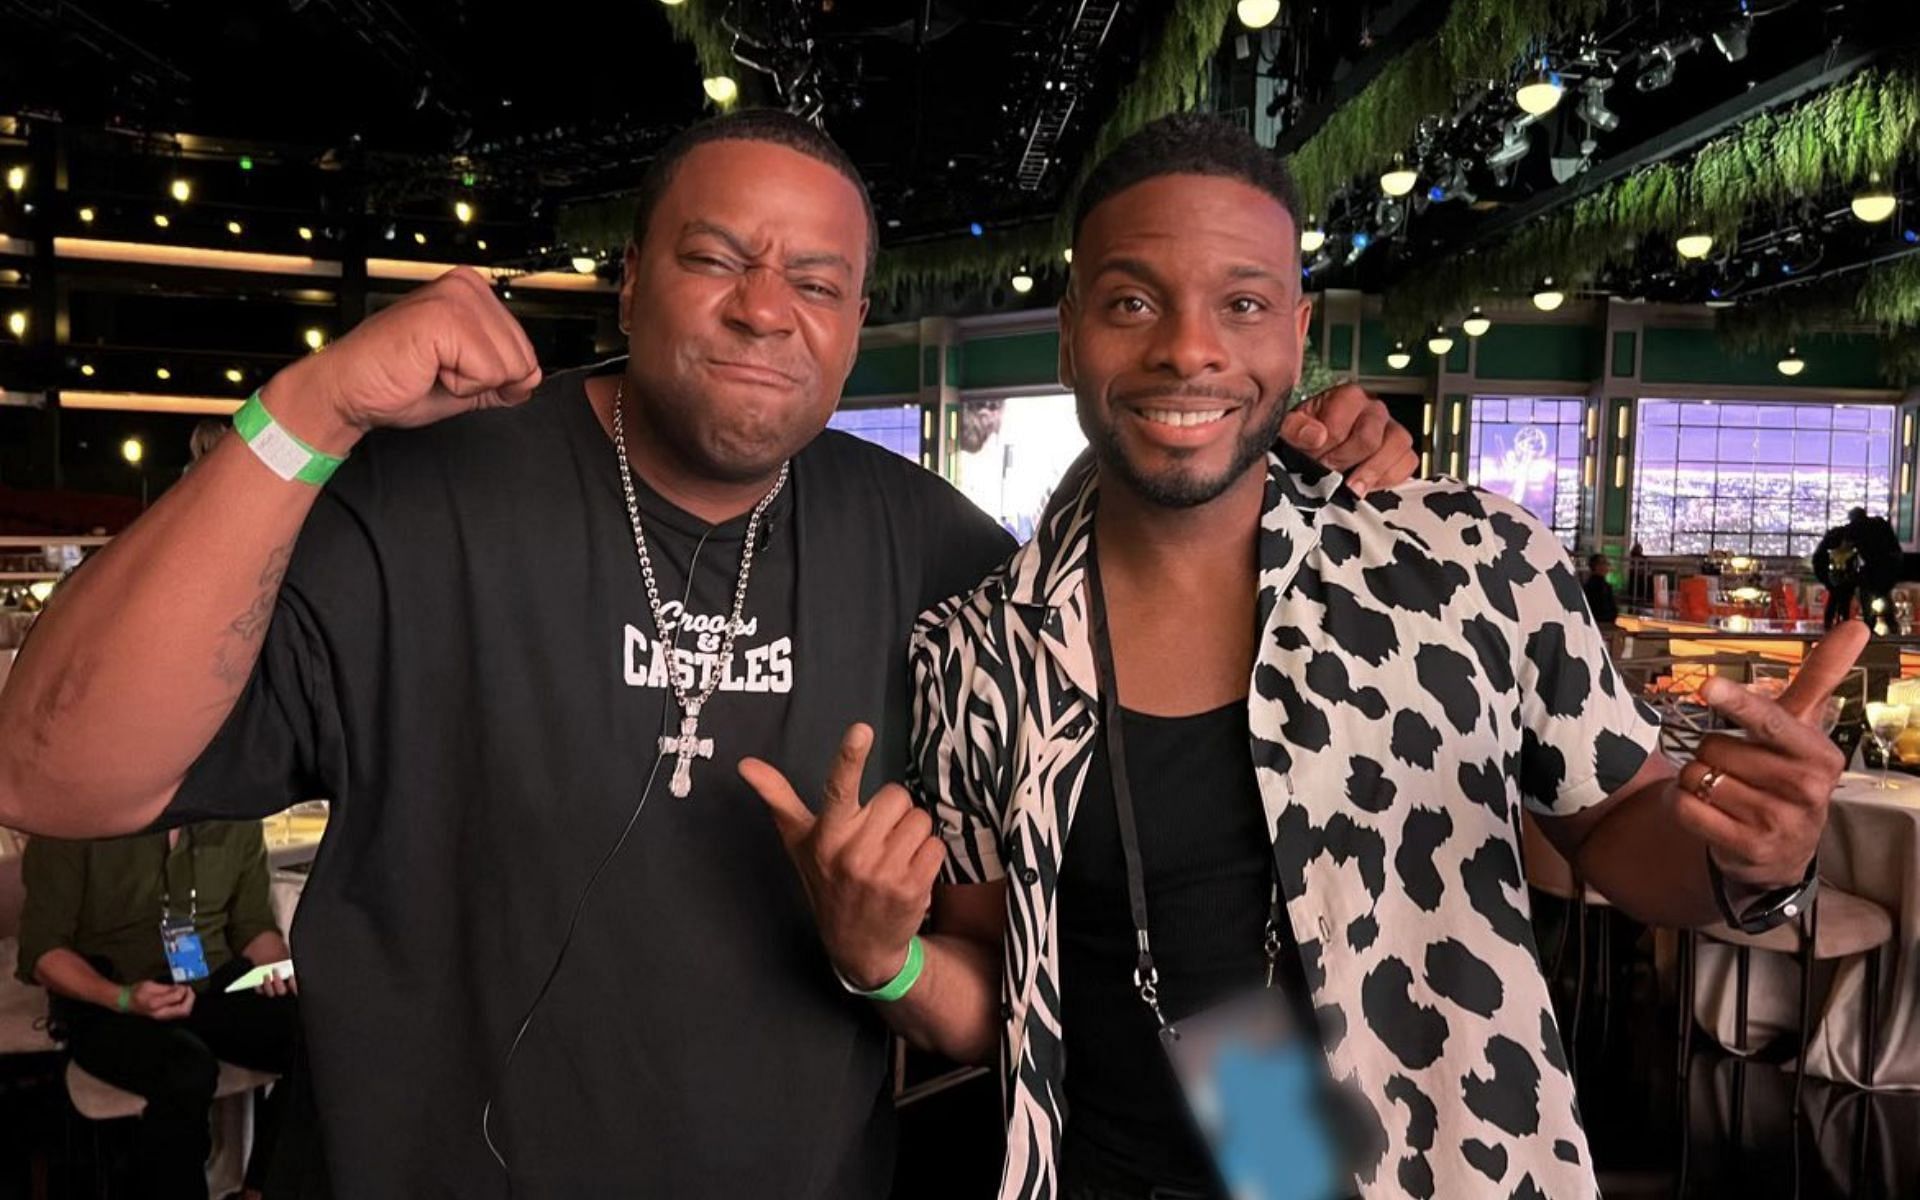 Kenan and Kel had a brief Good Brother reunion at the Emmys 2022 (Image via kenanthompson/ Twitter)